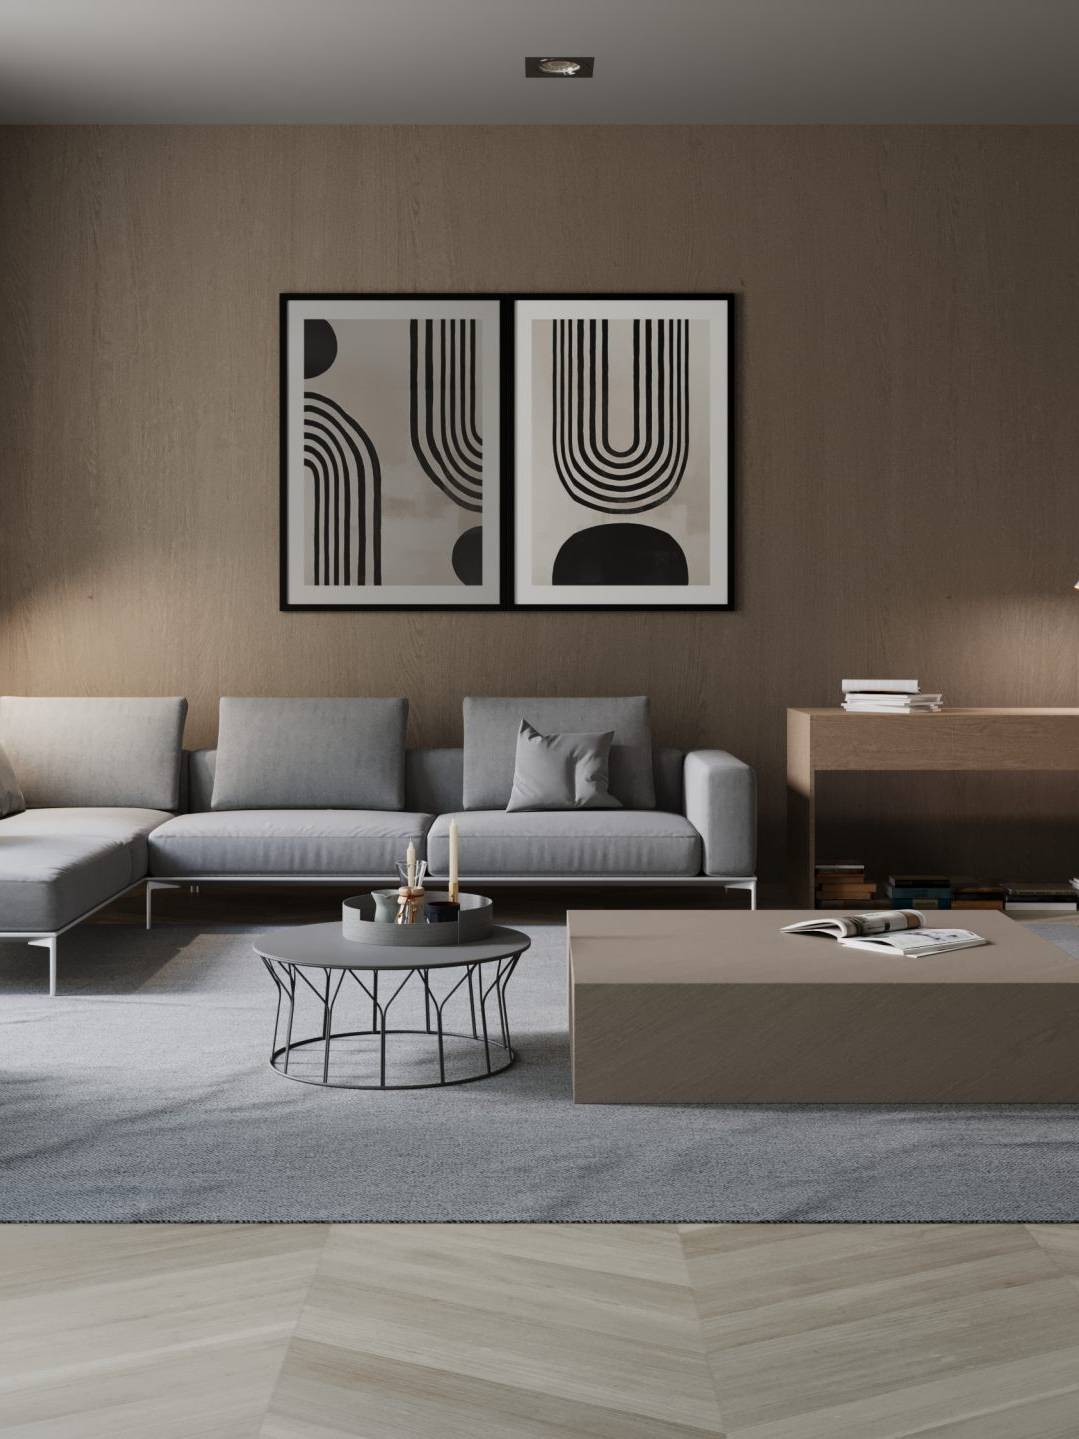 3D visualization of a modern living room by CG VIZ Studio, featuring an armchair, sofa, coffee table, and study table against a snowy window backdrop.